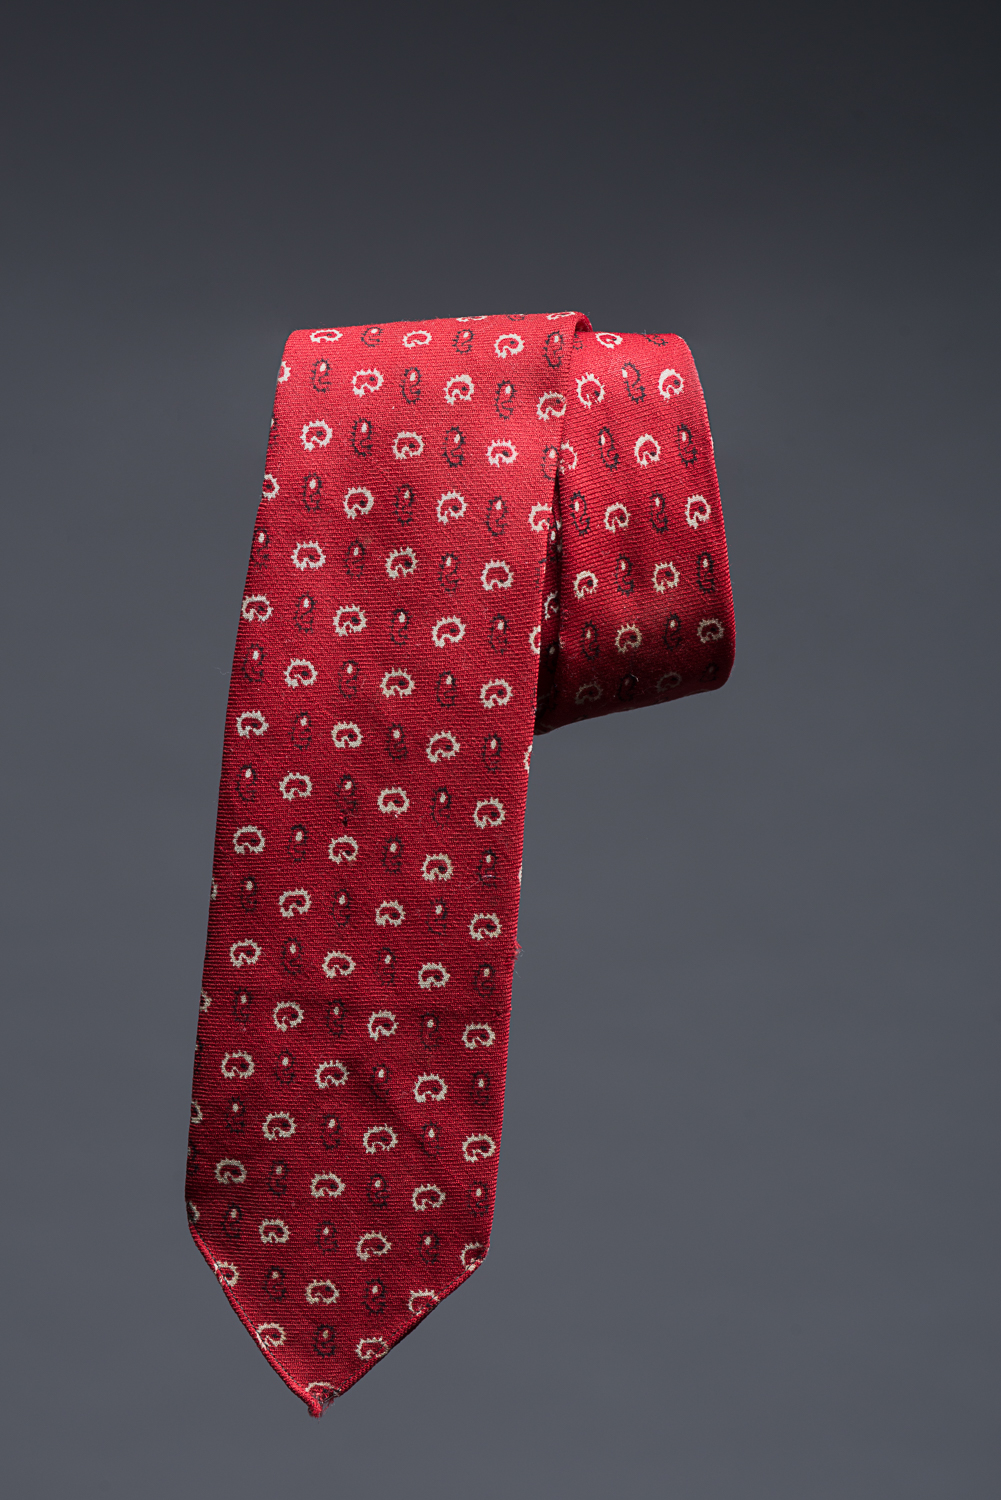 This red tie with a black-and-white abstract pattern belonged to David Honig. He bought it when he was 17 years old after graduating from a Jewish private business school in Krakow, Poland. (Photo: Peter Berra)